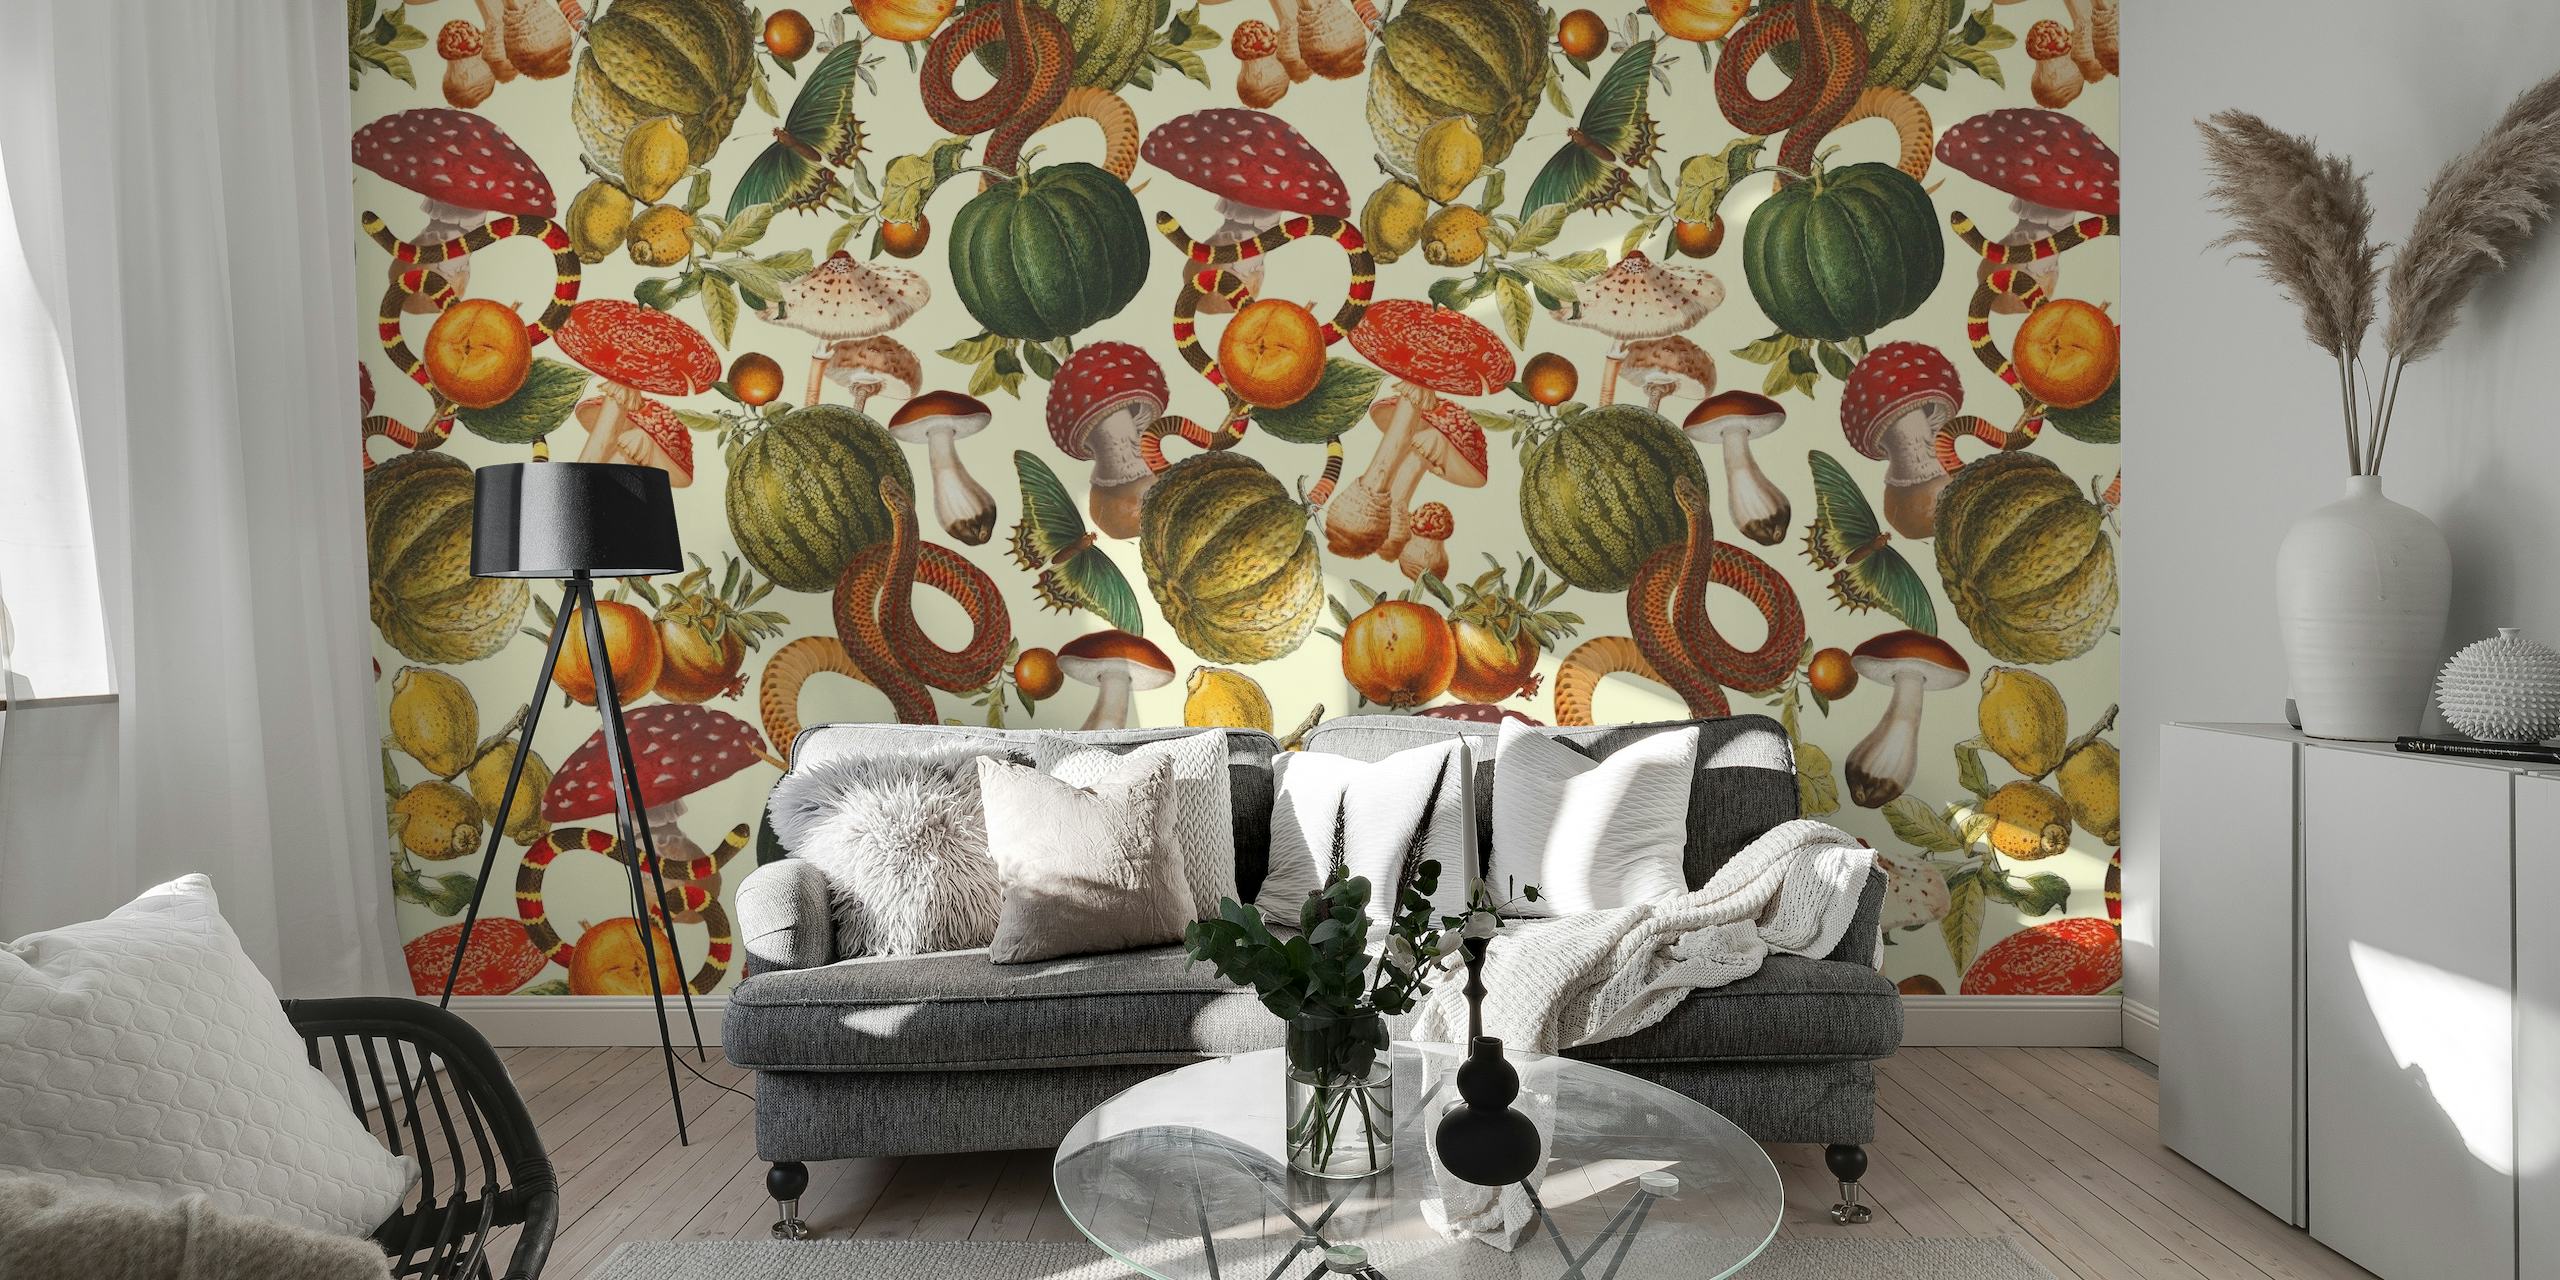 Enchanted forest wall mural with colorful mushrooms, adding whimsy to any room.